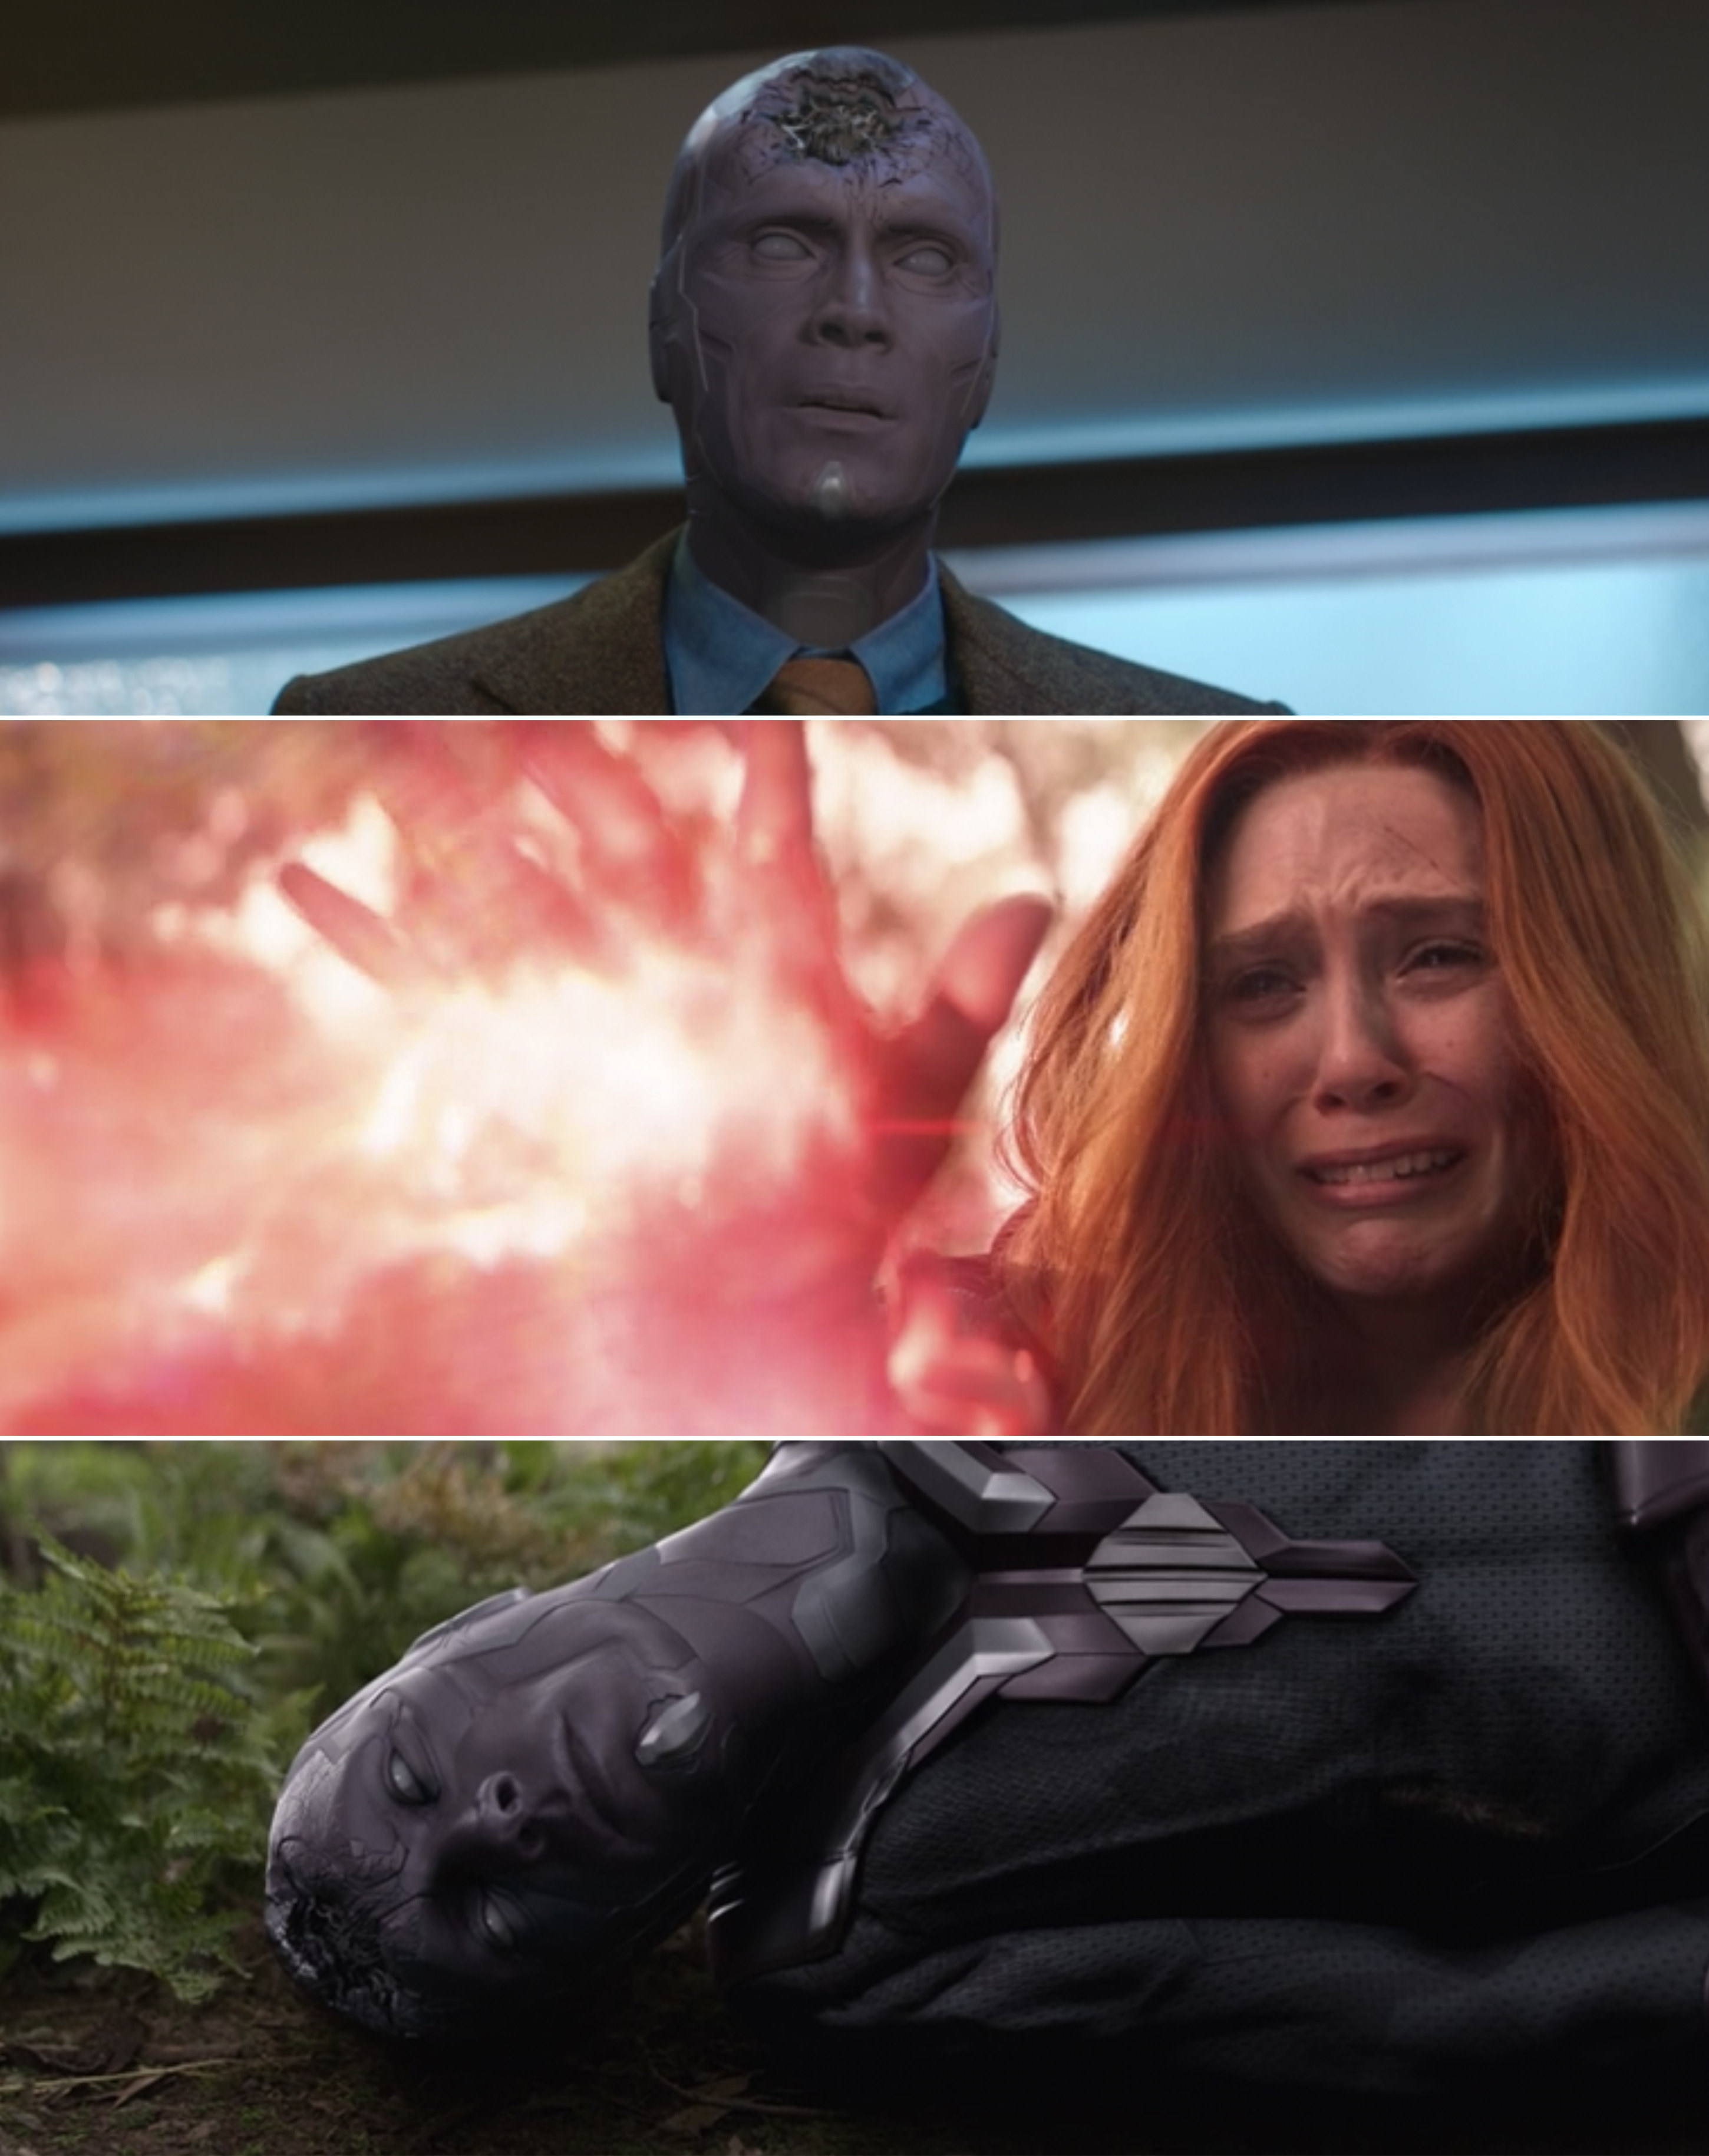 Wanda weeping and using her magic and Vision on the ground, now purple, with his head smashed open vs. Vision standing with his head smashed open